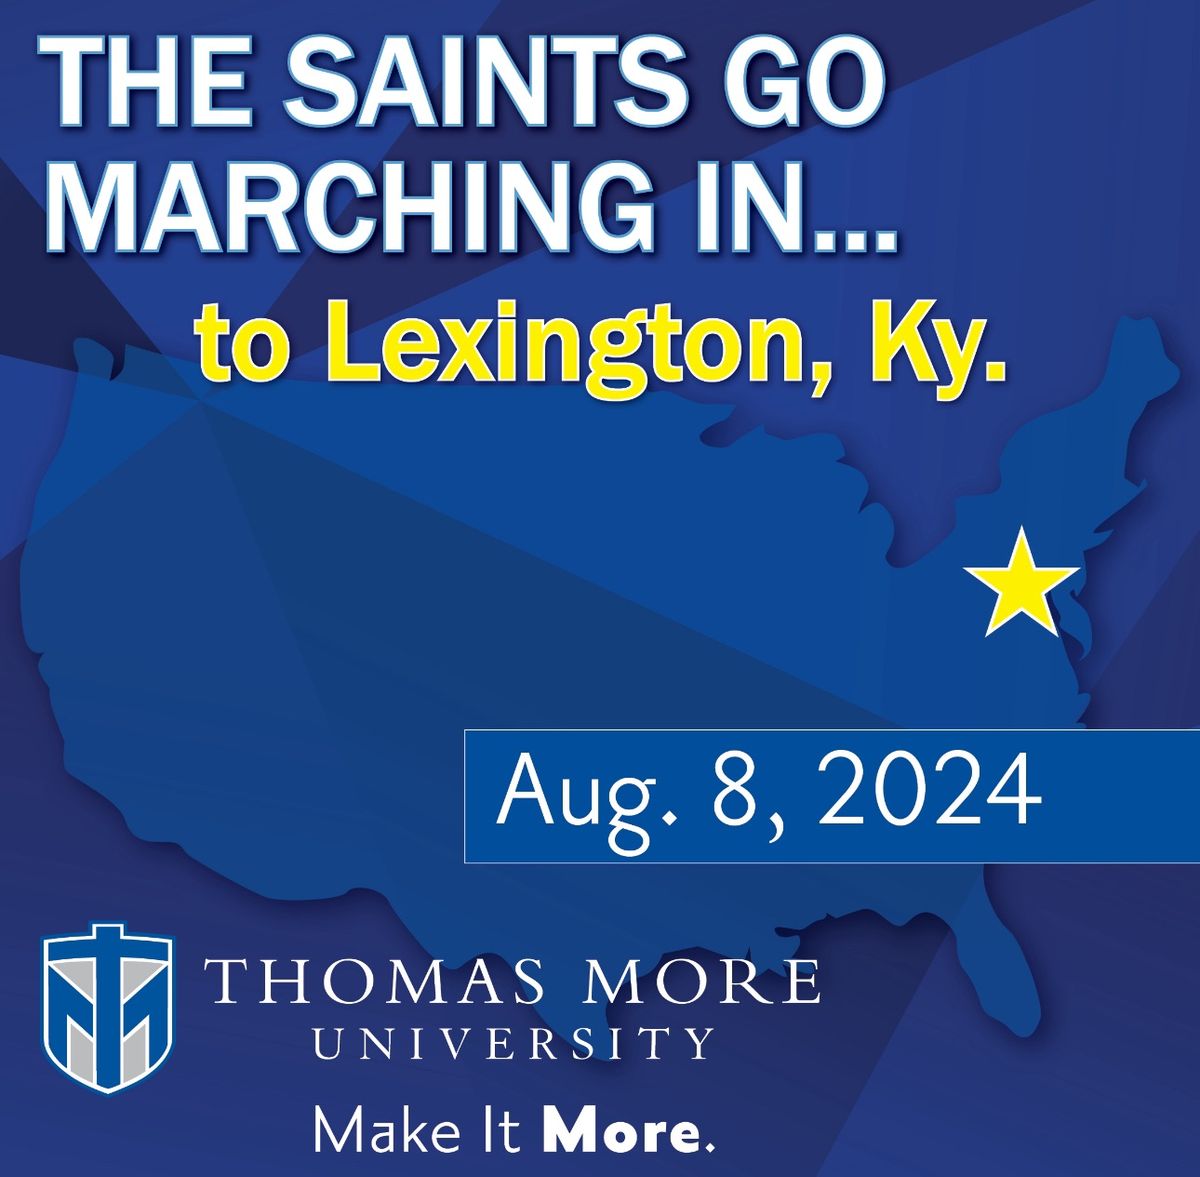 The Saints Go Marching In.. to Lexington!